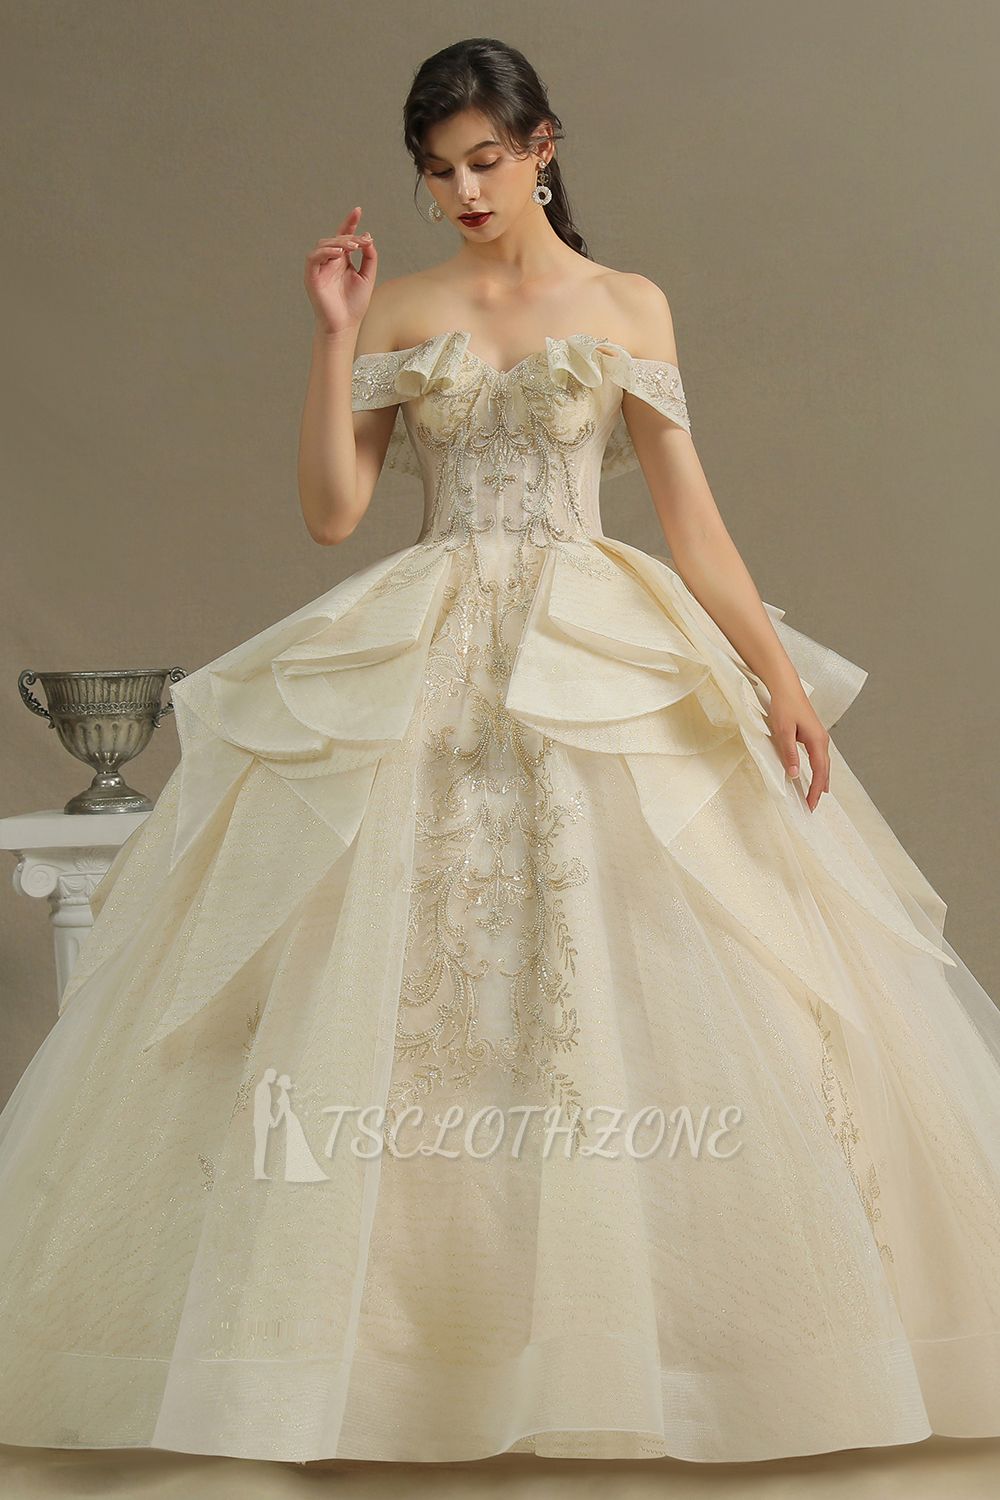 Gorgeous Off-the-Shoulder Floral Appliques Ball Gown Ivory aline Bridal Gown